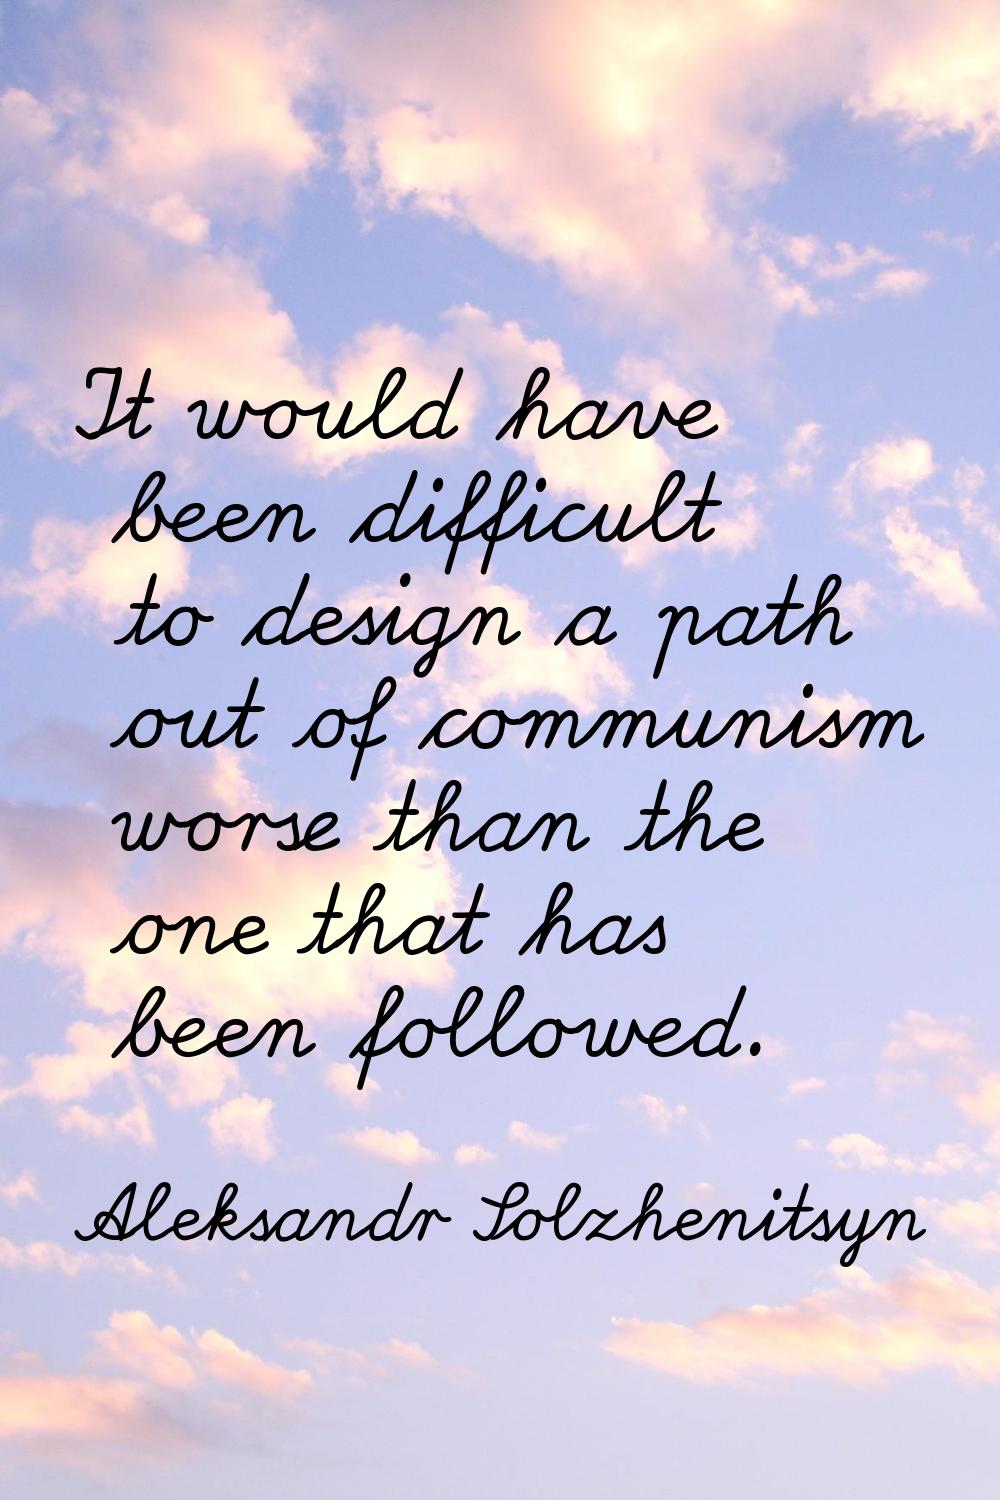 It would have been difficult to design a path out of communism worse than the one that has been fol